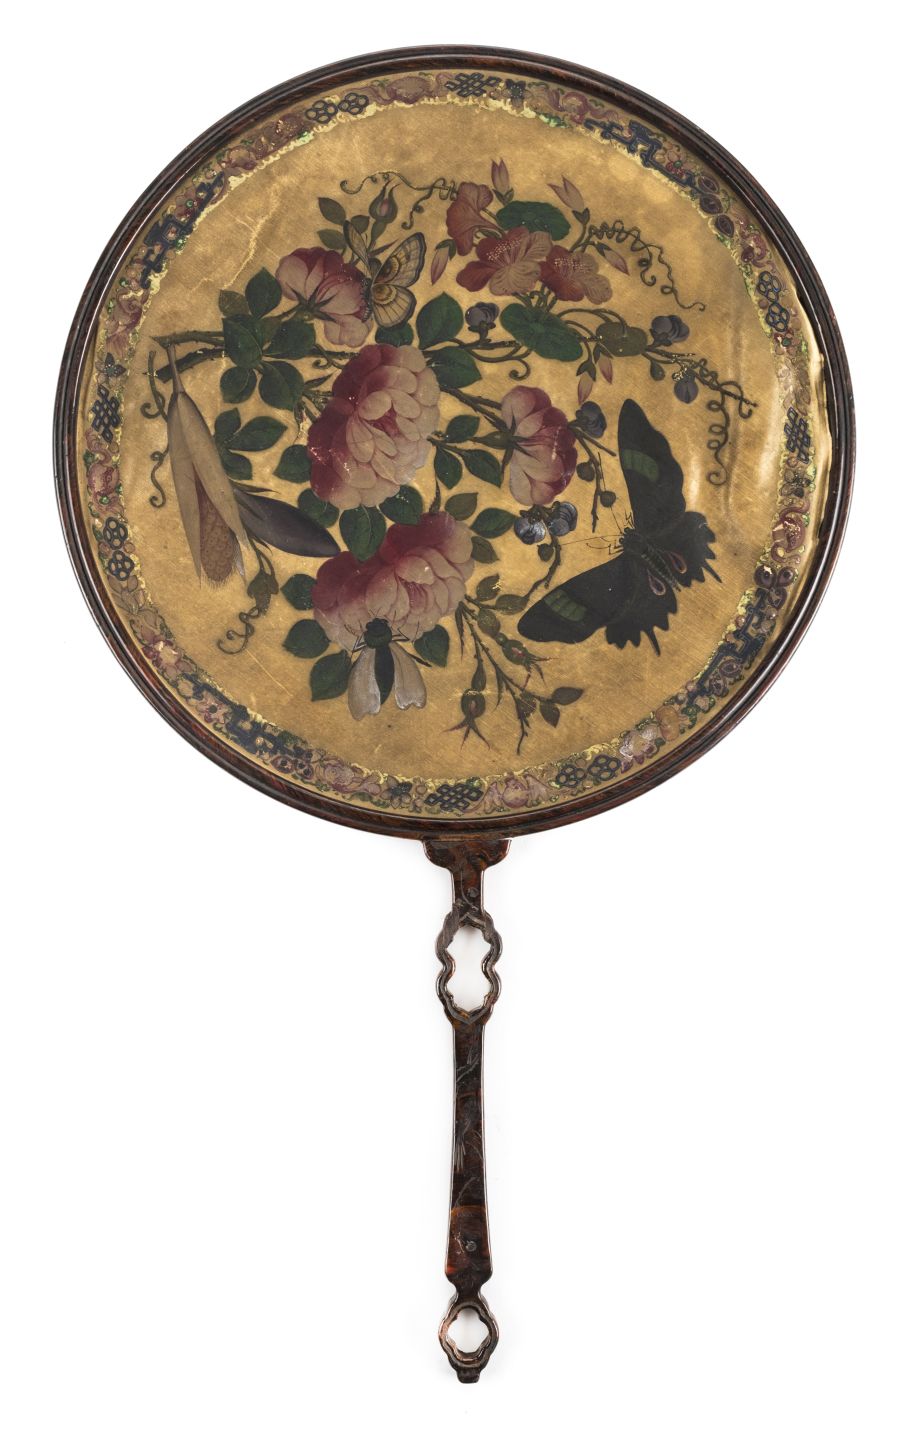 *Fire screen. A hand-held face screen, Chinese, early 20th century, fabric screen of circular form